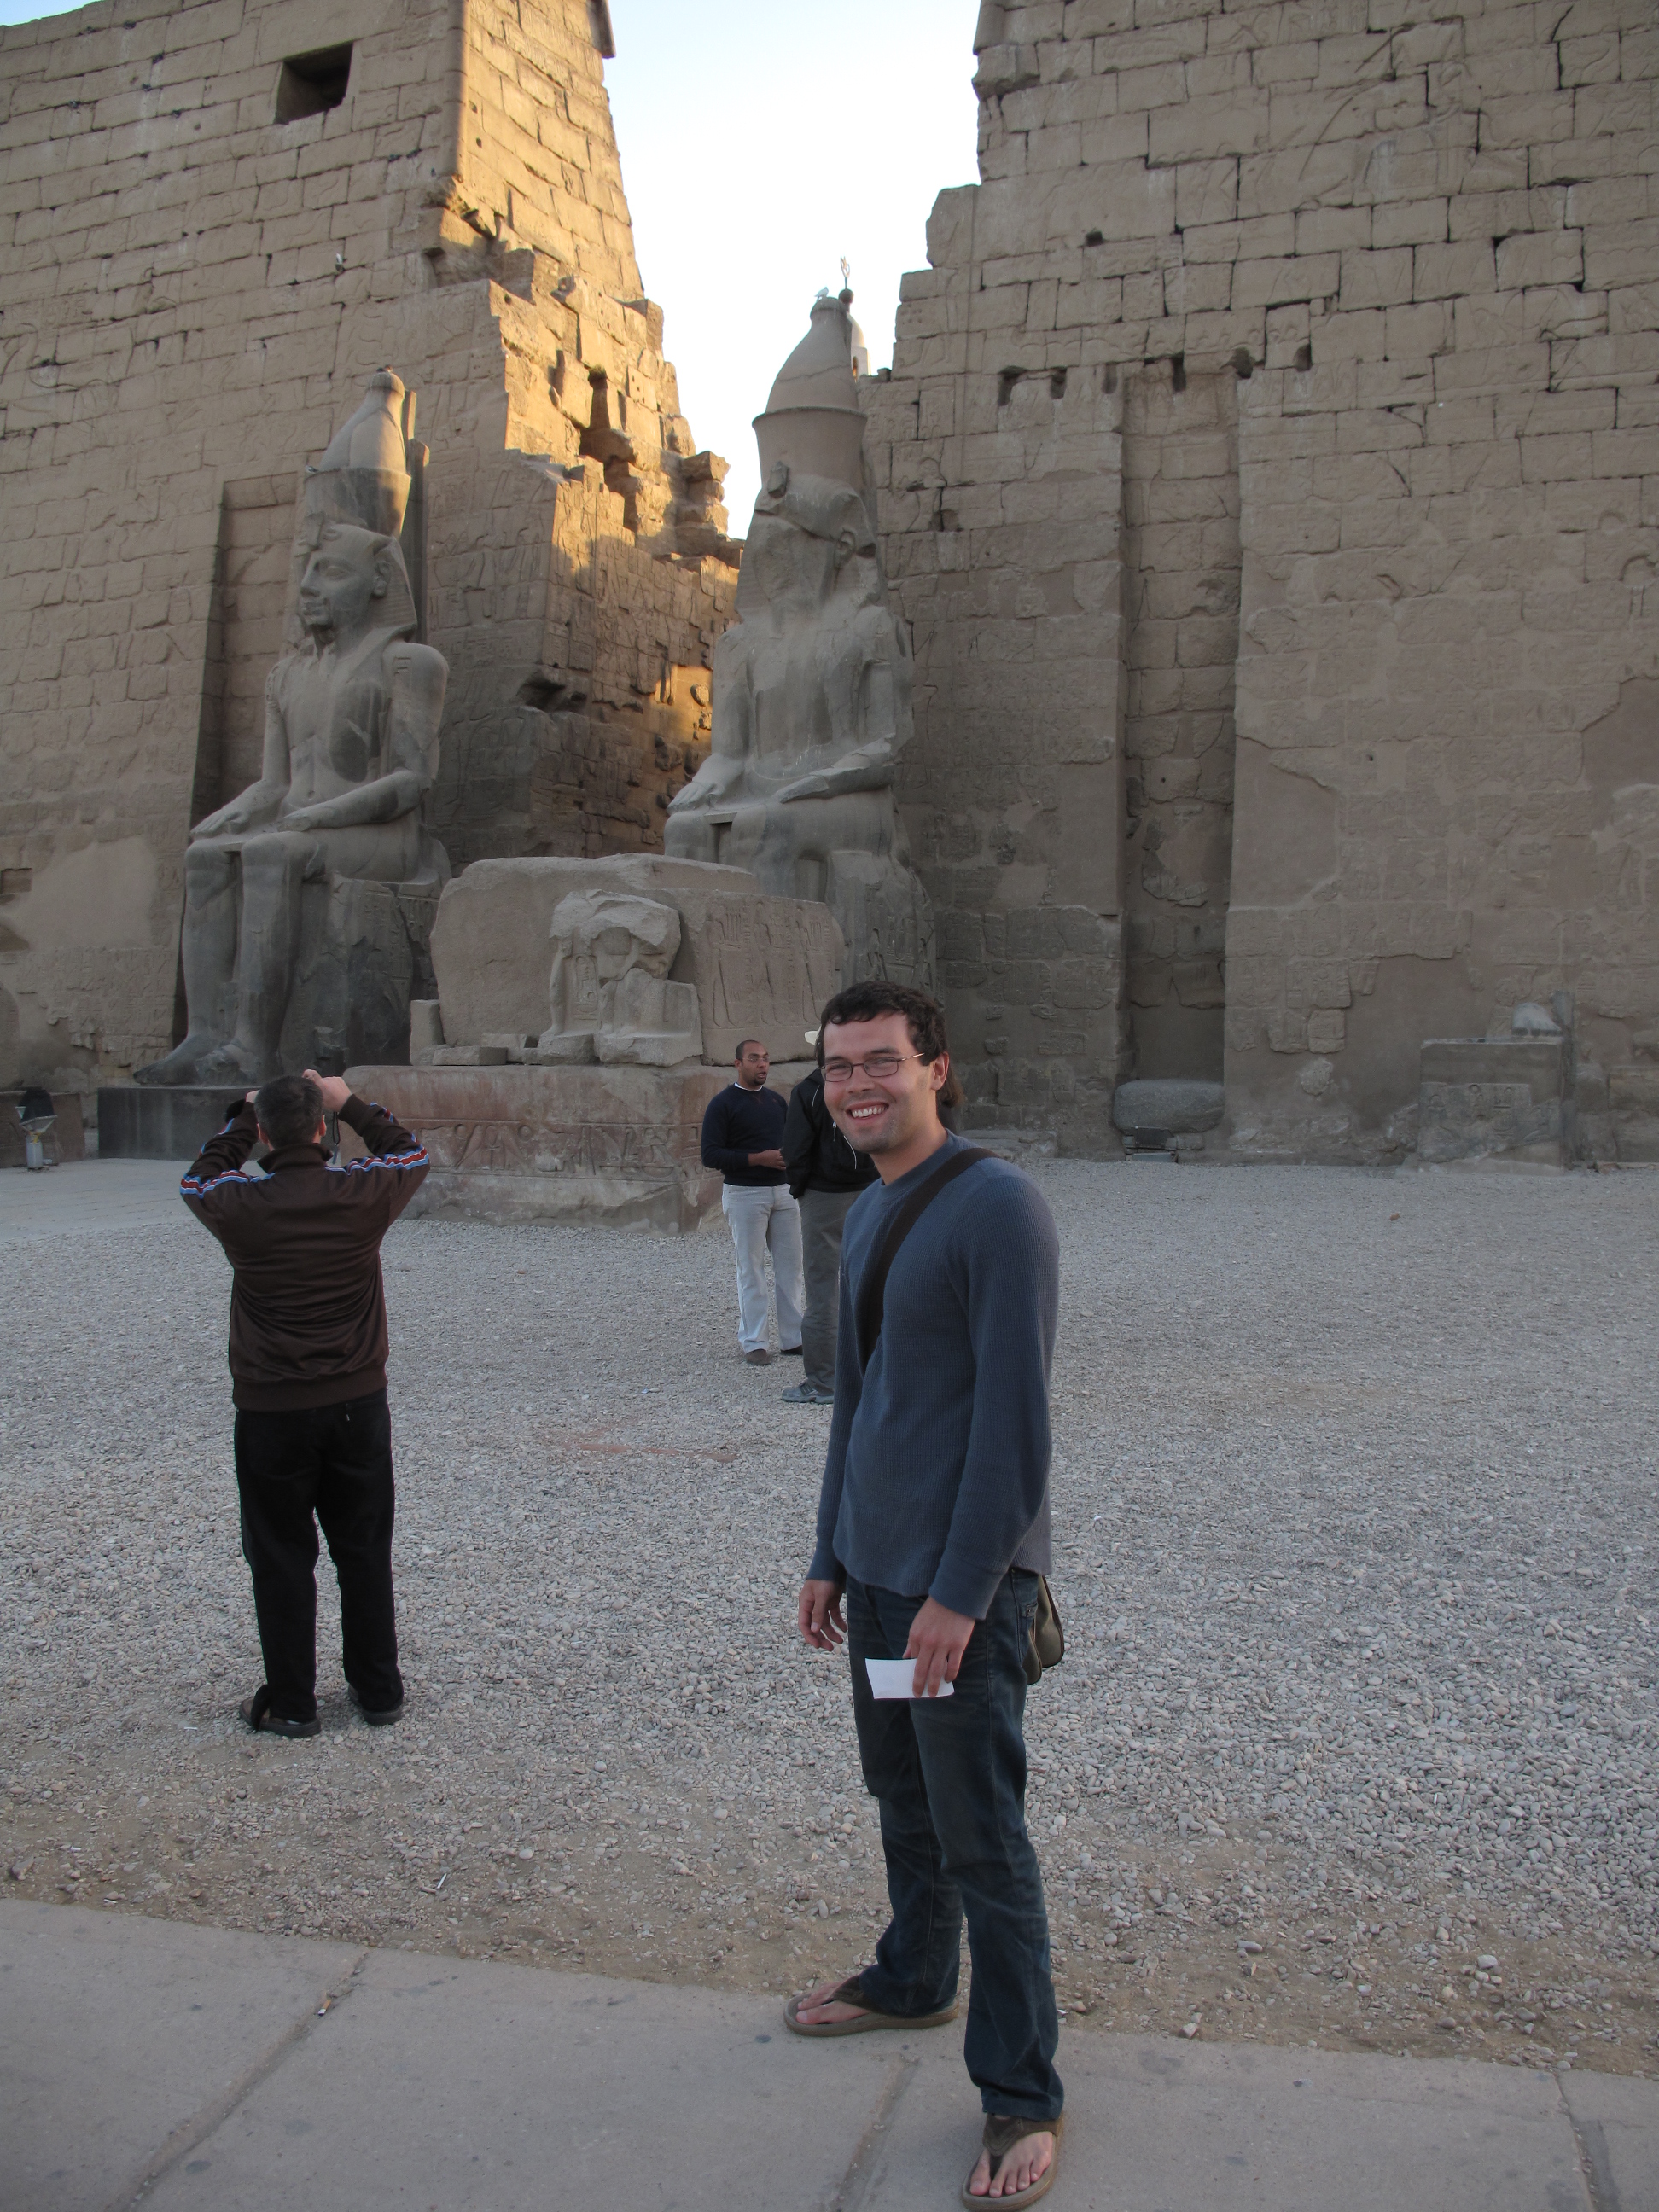 This is a picture of me in Egypt outside a temple.